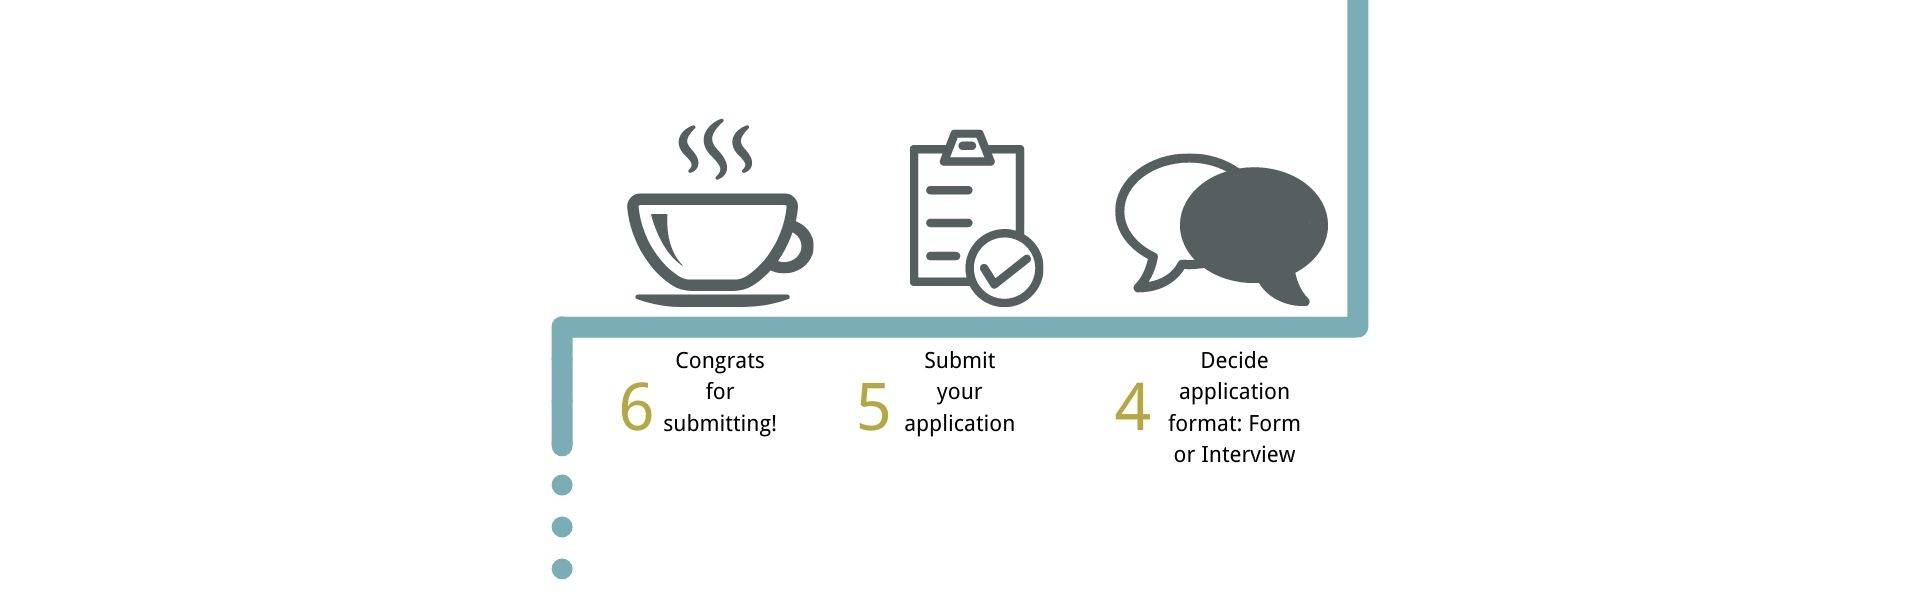 Icons to explain the text  3.) Gather information for your proposal